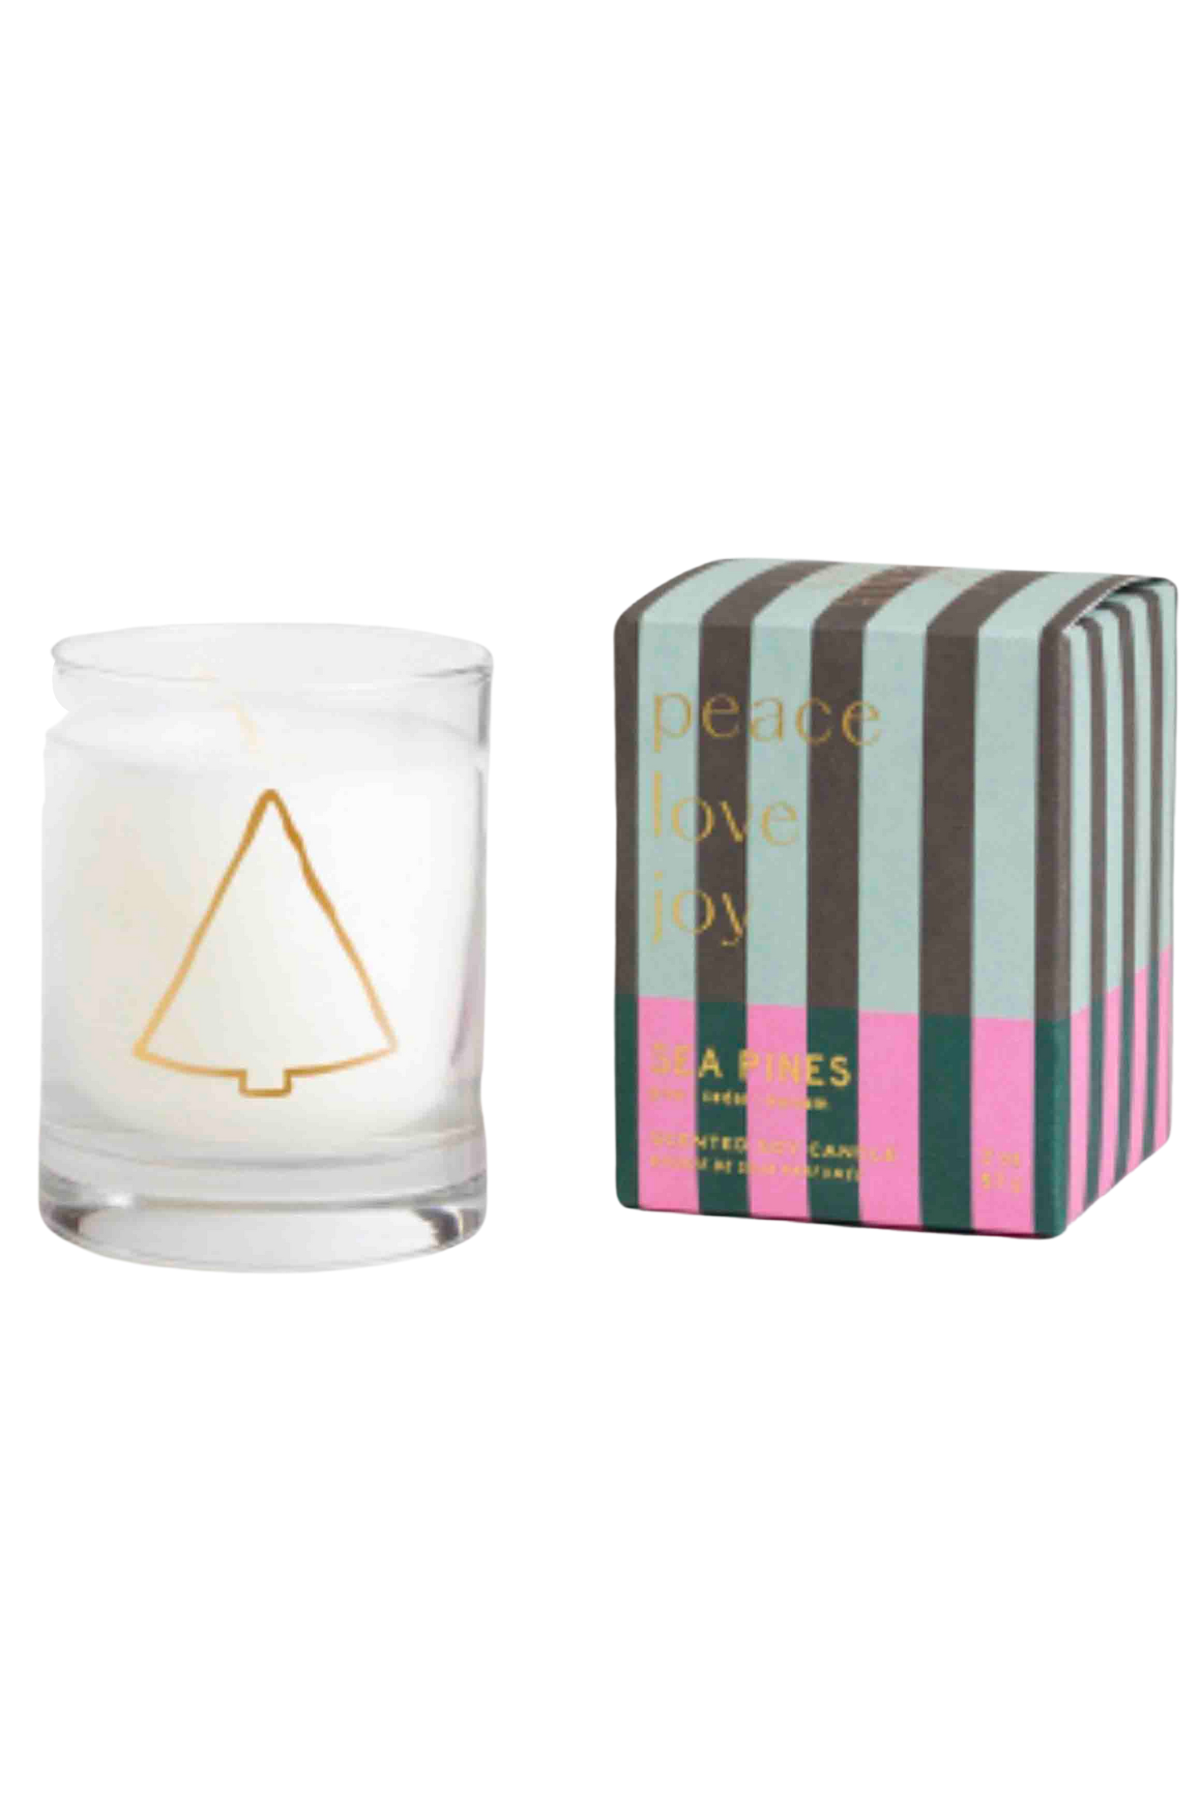 Sea Pines Boxed Holiday Votive Scented Soy Candle by Mersea